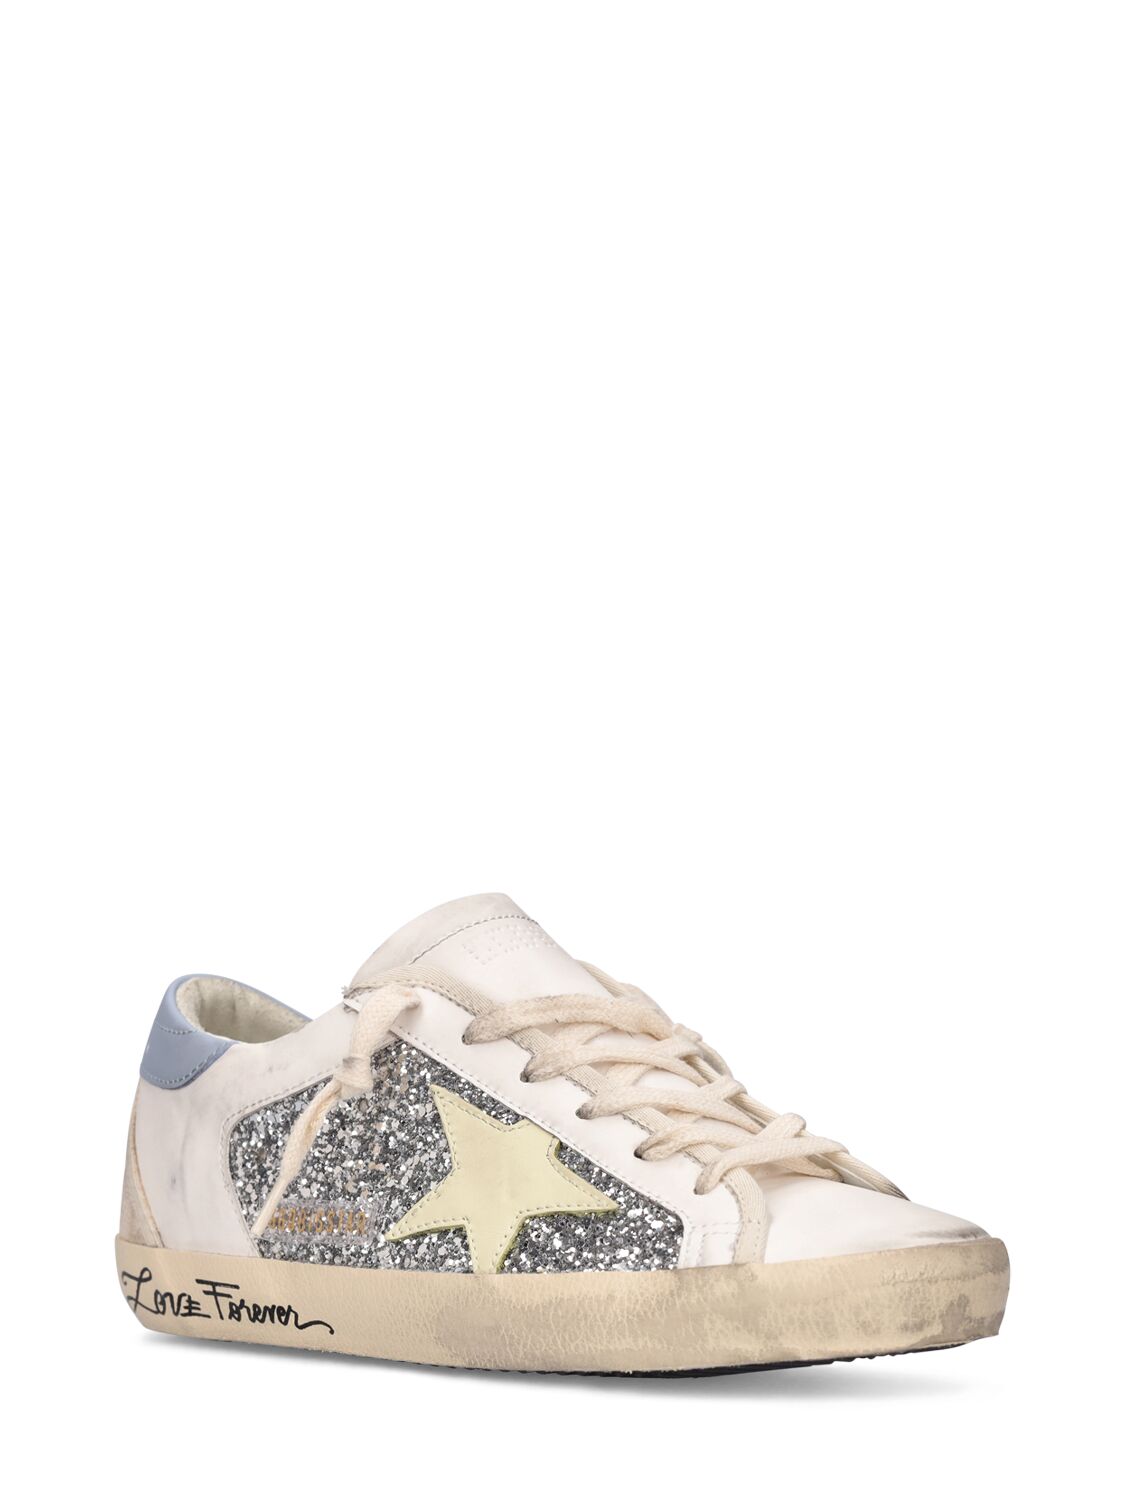 Shop Golden Goose 20mm Super-star Bio Based Sneakers In Silver,white